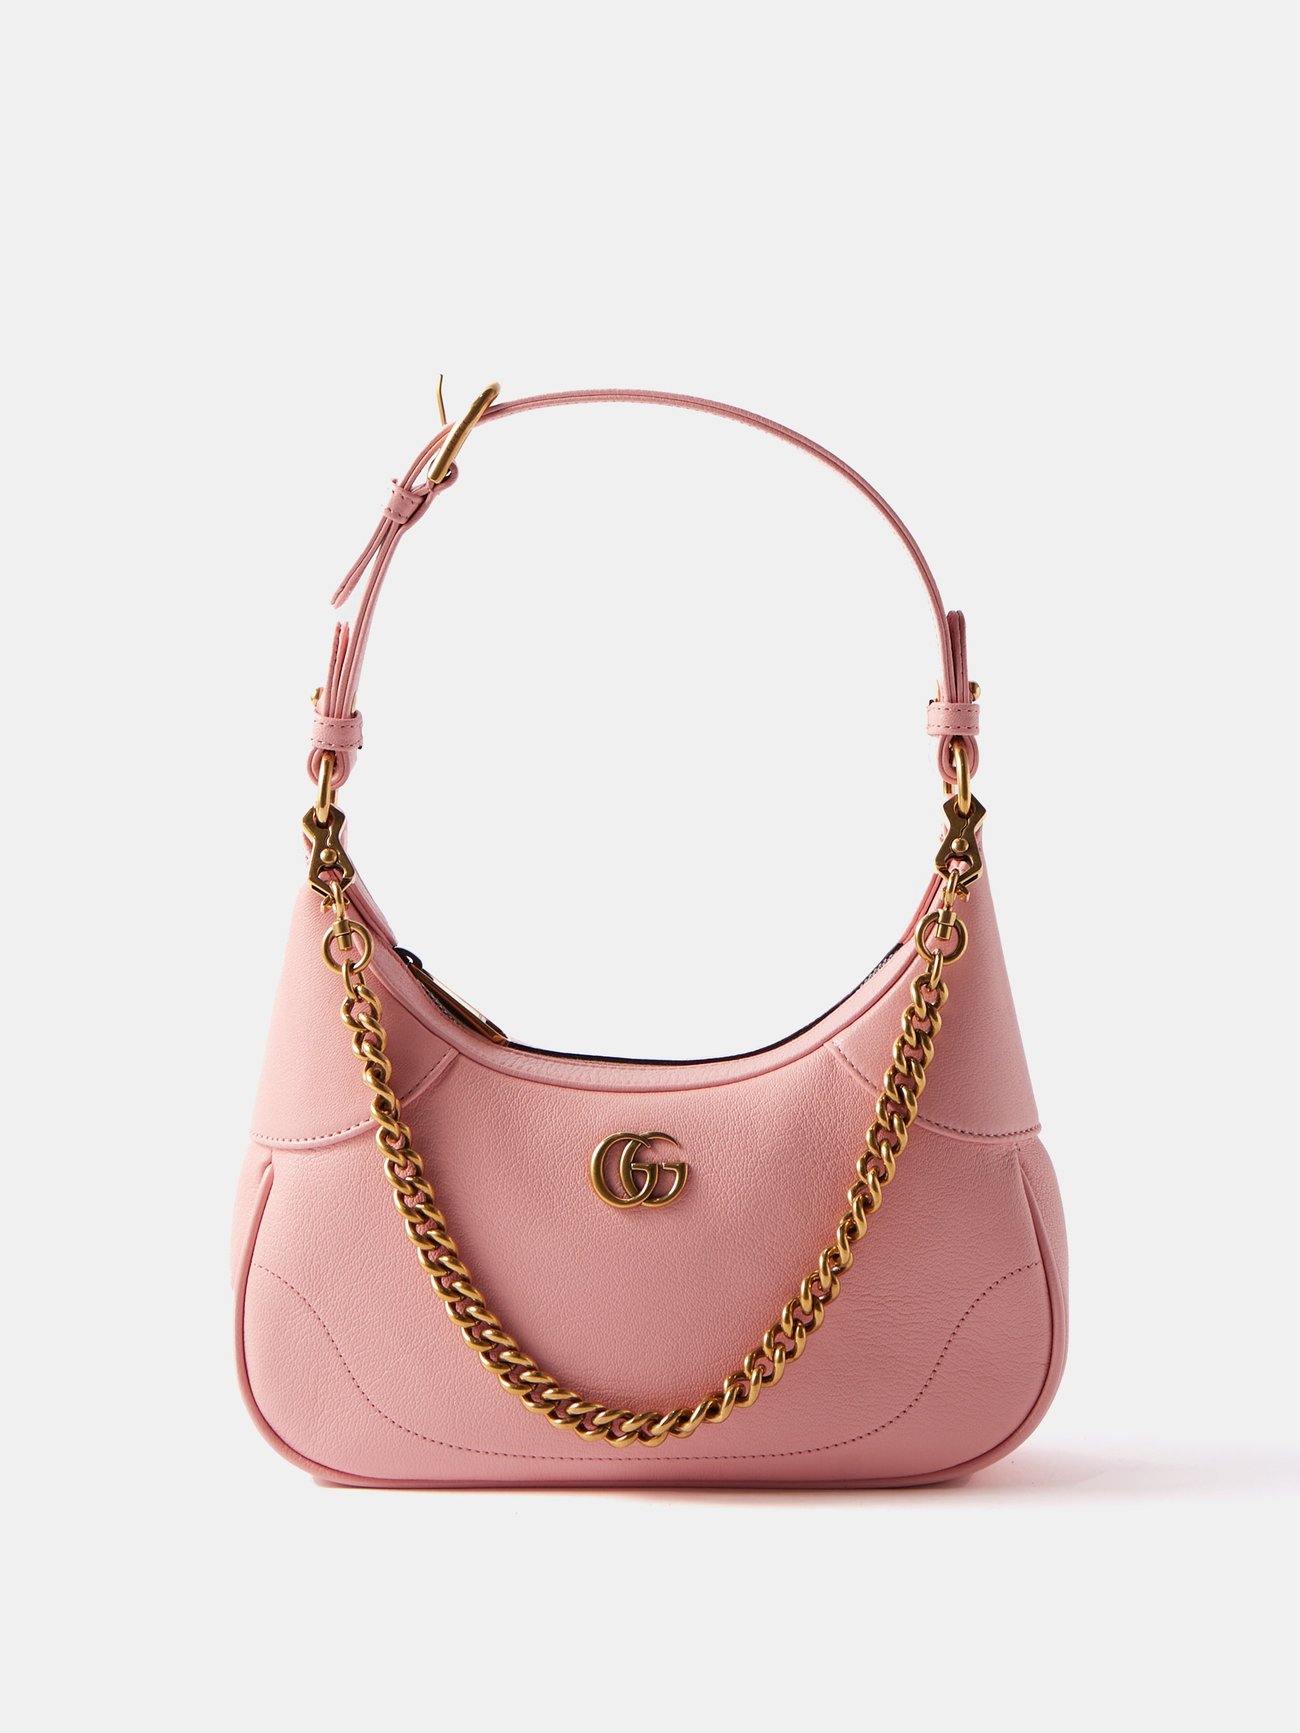 GUCCI GG Marmont Camera Bag in Pastel Pink Leather ReSale  COCOON